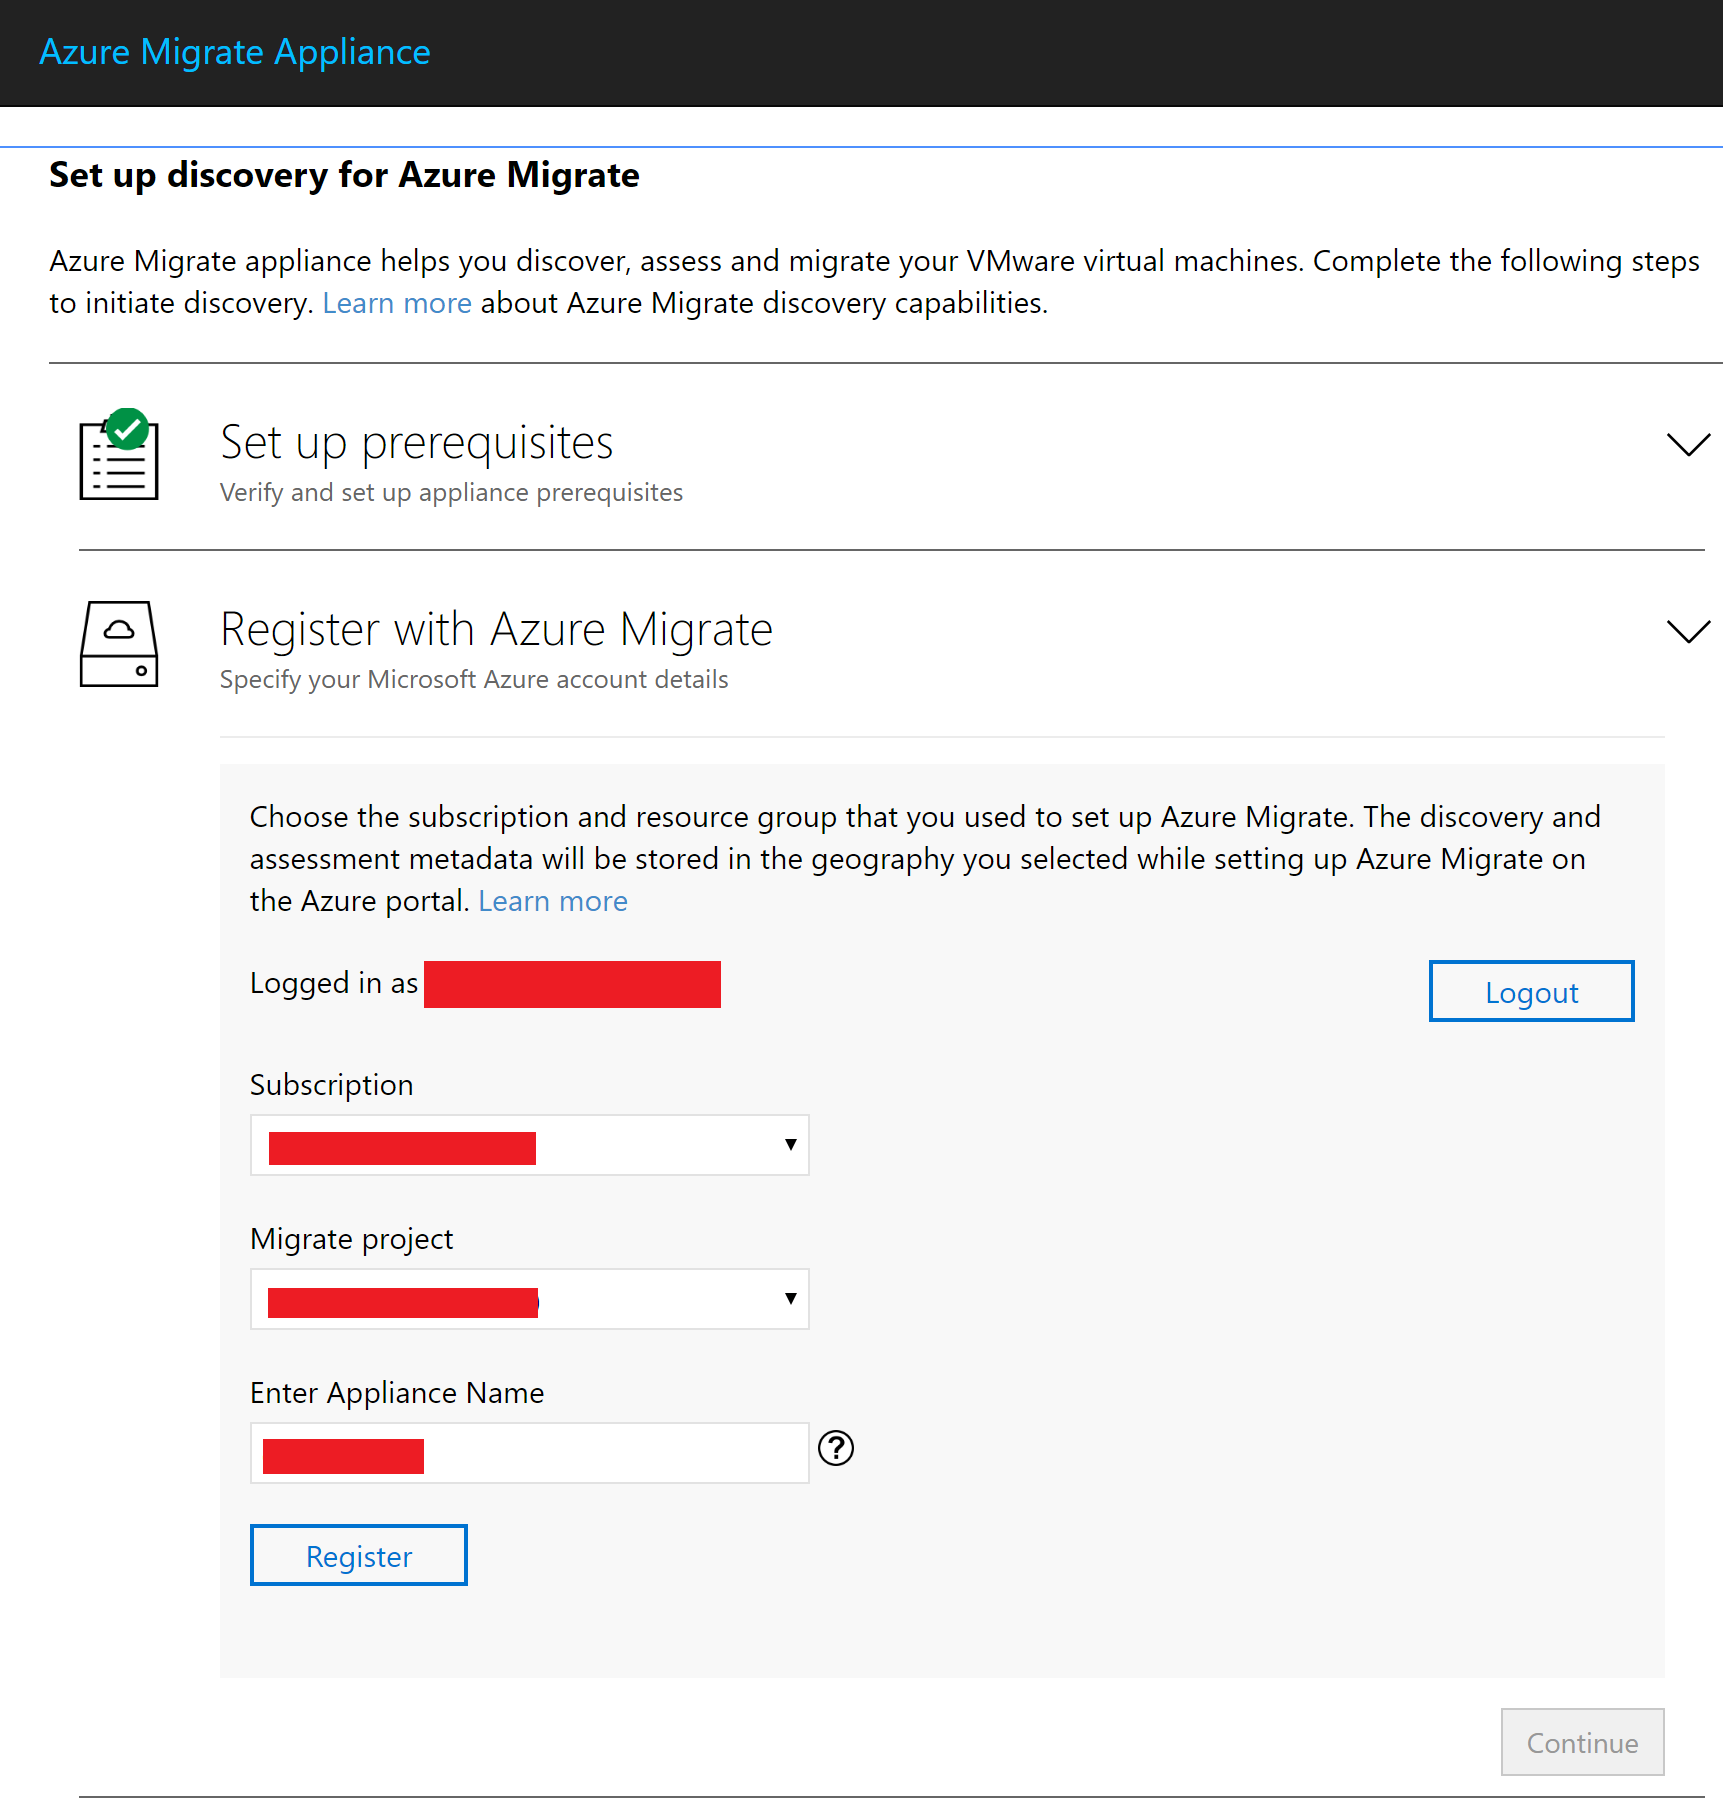 Screenshot that shows selections for registering with Azure Migrate.